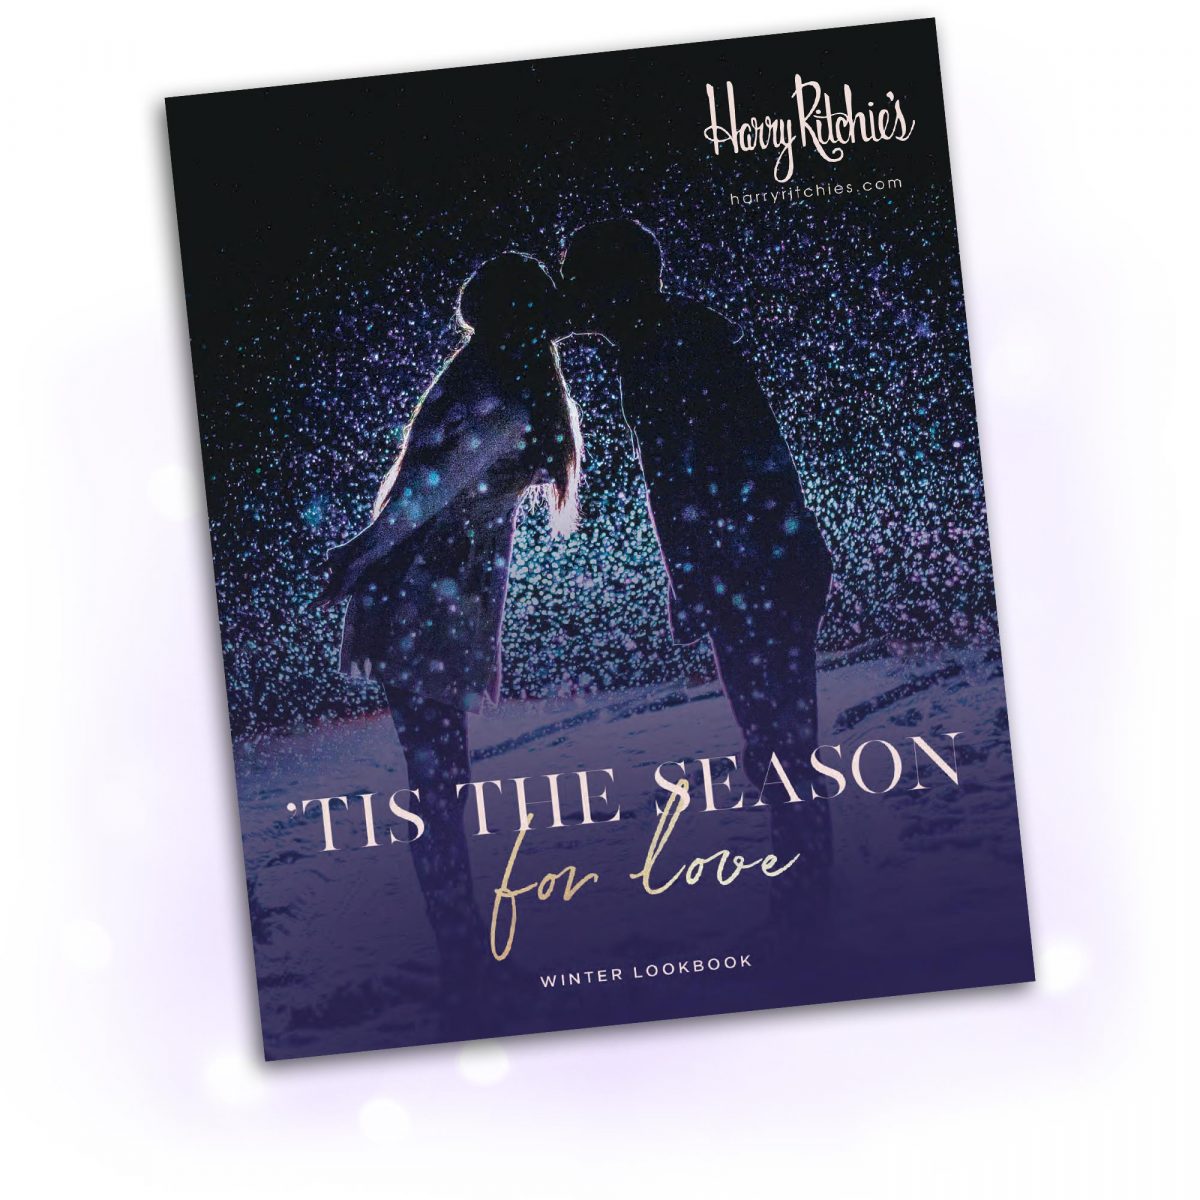 Harry Ritchies Holiday Gift Guide 2021 Cover - Tis the Season for Love - Two people kissing in snowfall